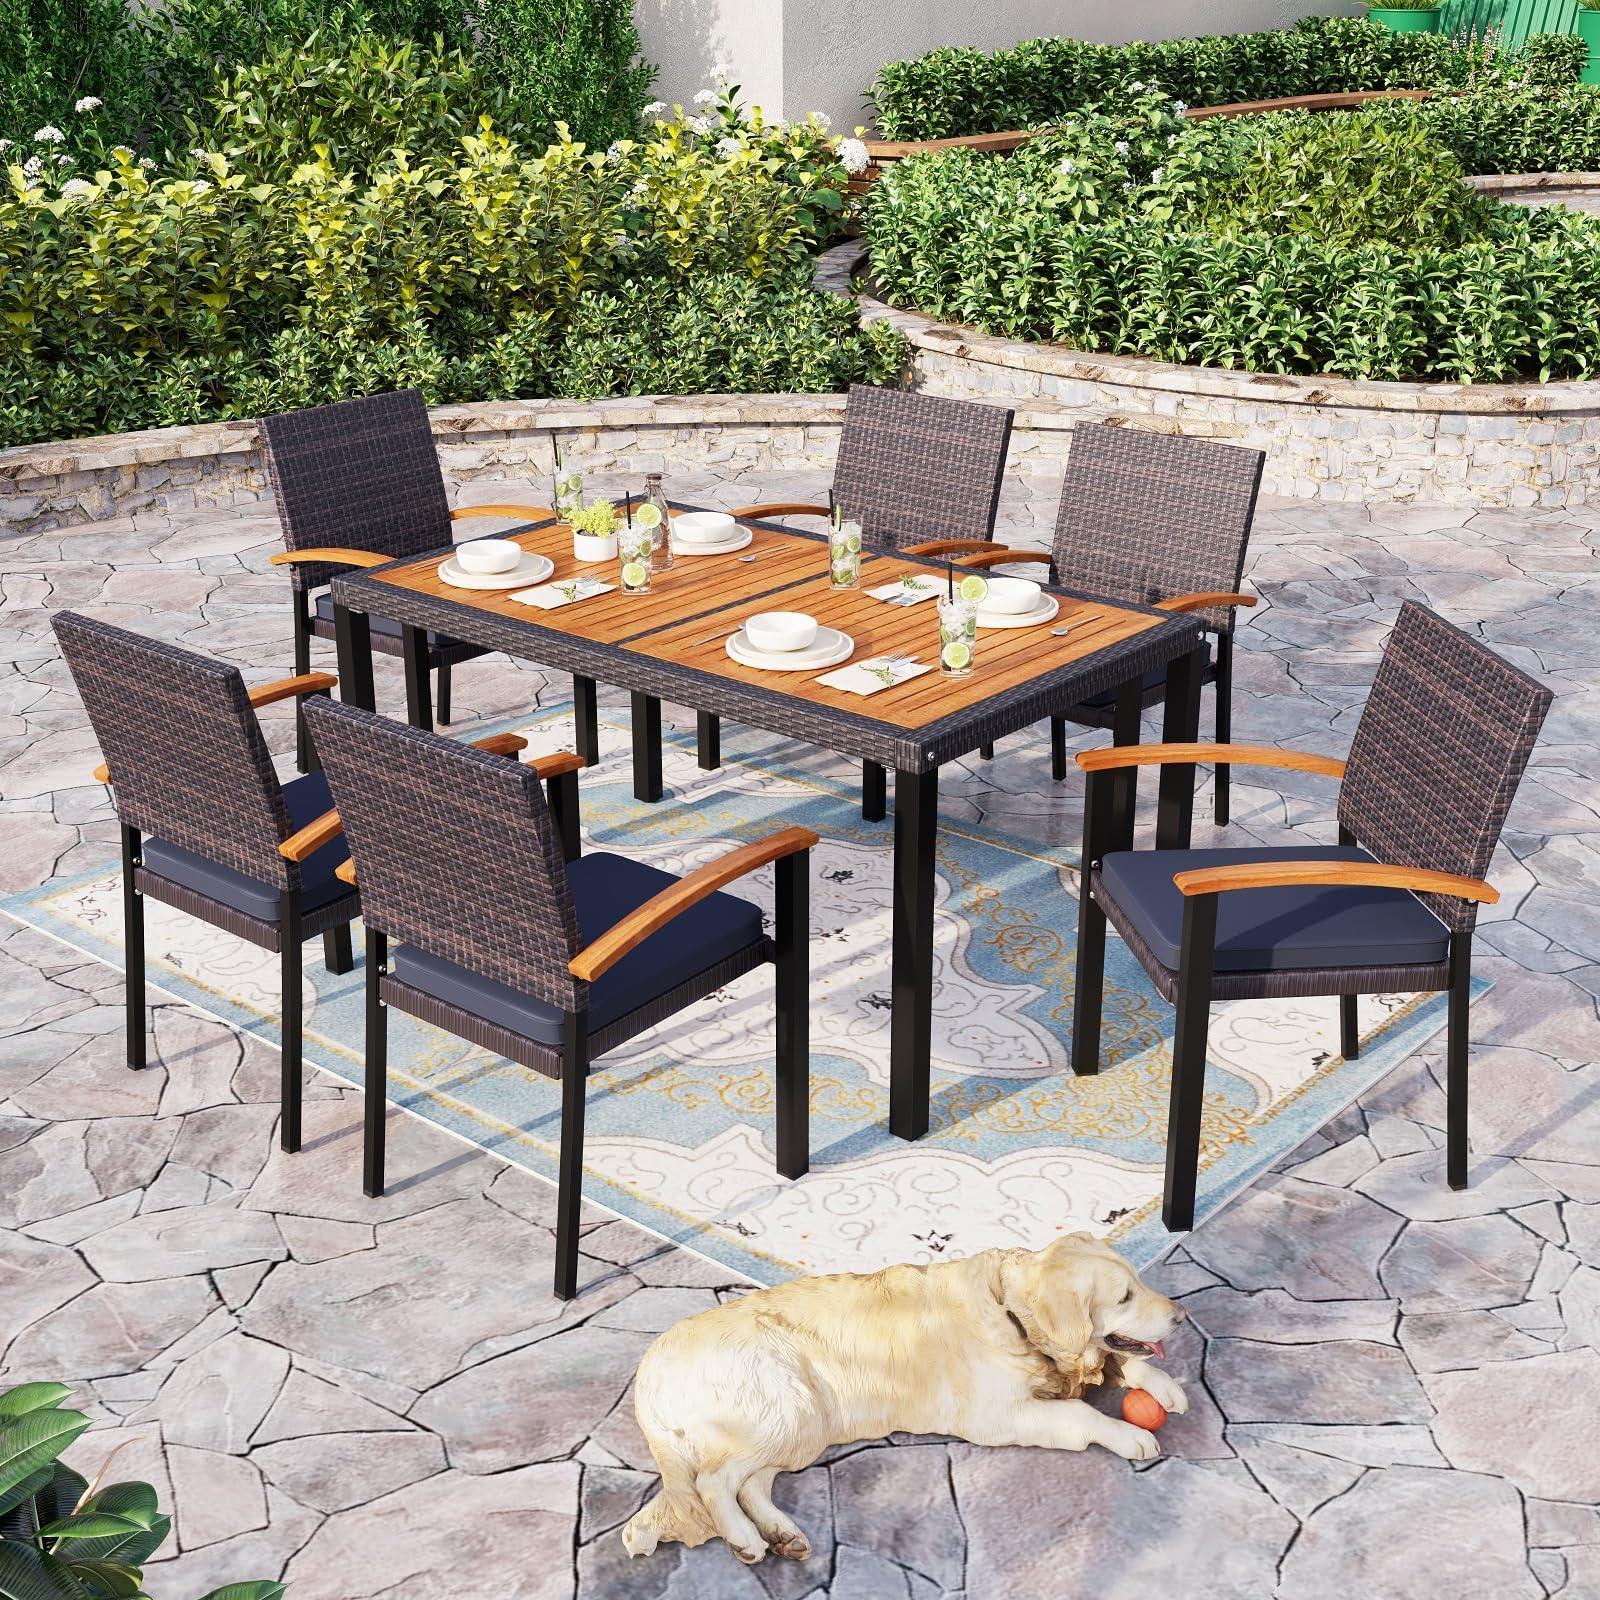 Sophia & William Outdoor Patio Dining Set Furniture 7 Pieces with 6 Stackable Cushioned Rattan Wicker Chairs and Rectangular Acacia Wood Table for Backyard Deck Garden Lawn Porch Poolside - CookCave